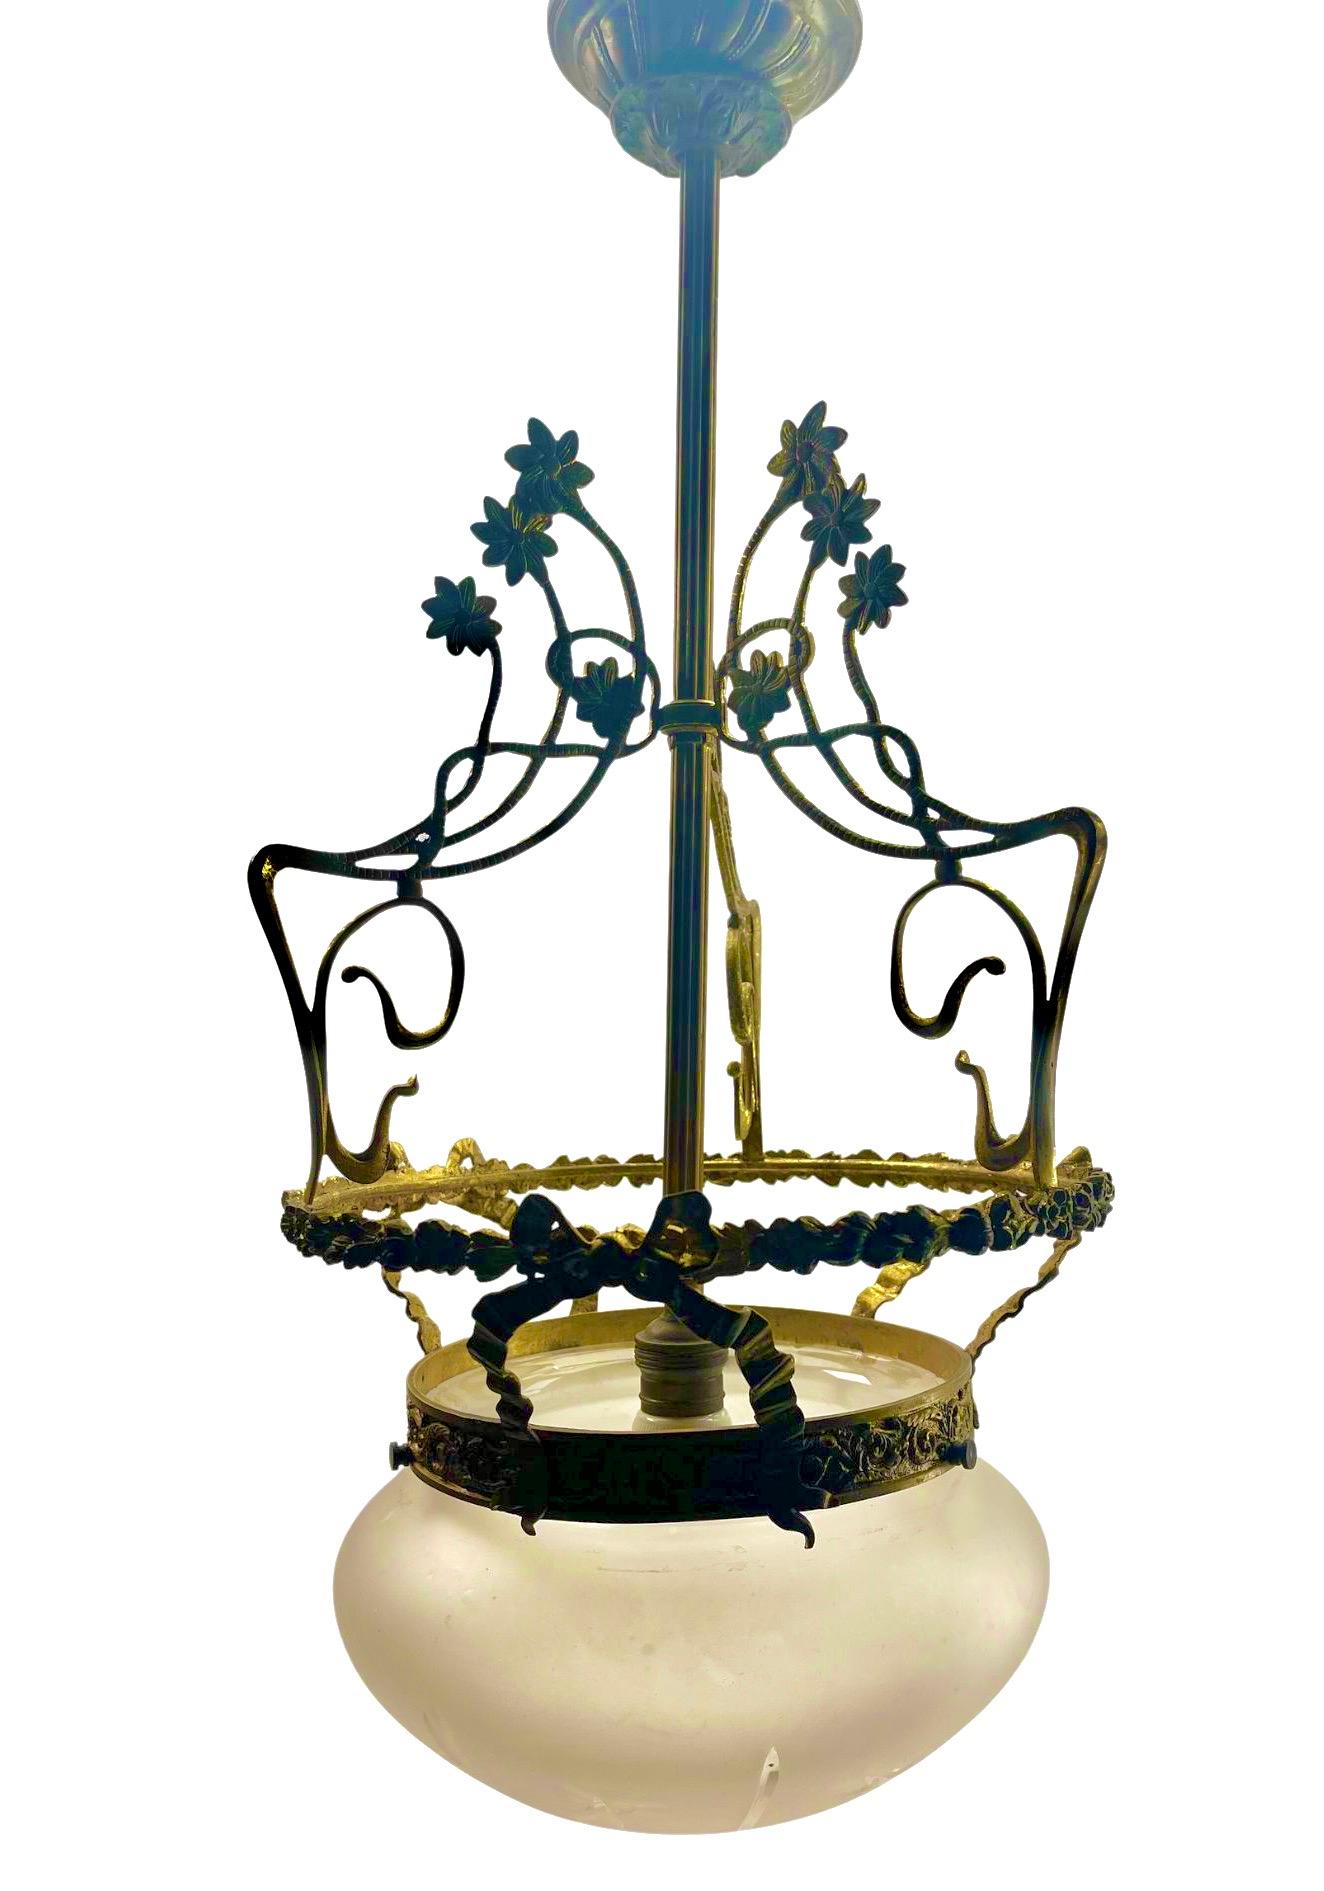 French Art Nouveau Solid Brass Chandelier With Floral Decorations  1930s For Sale